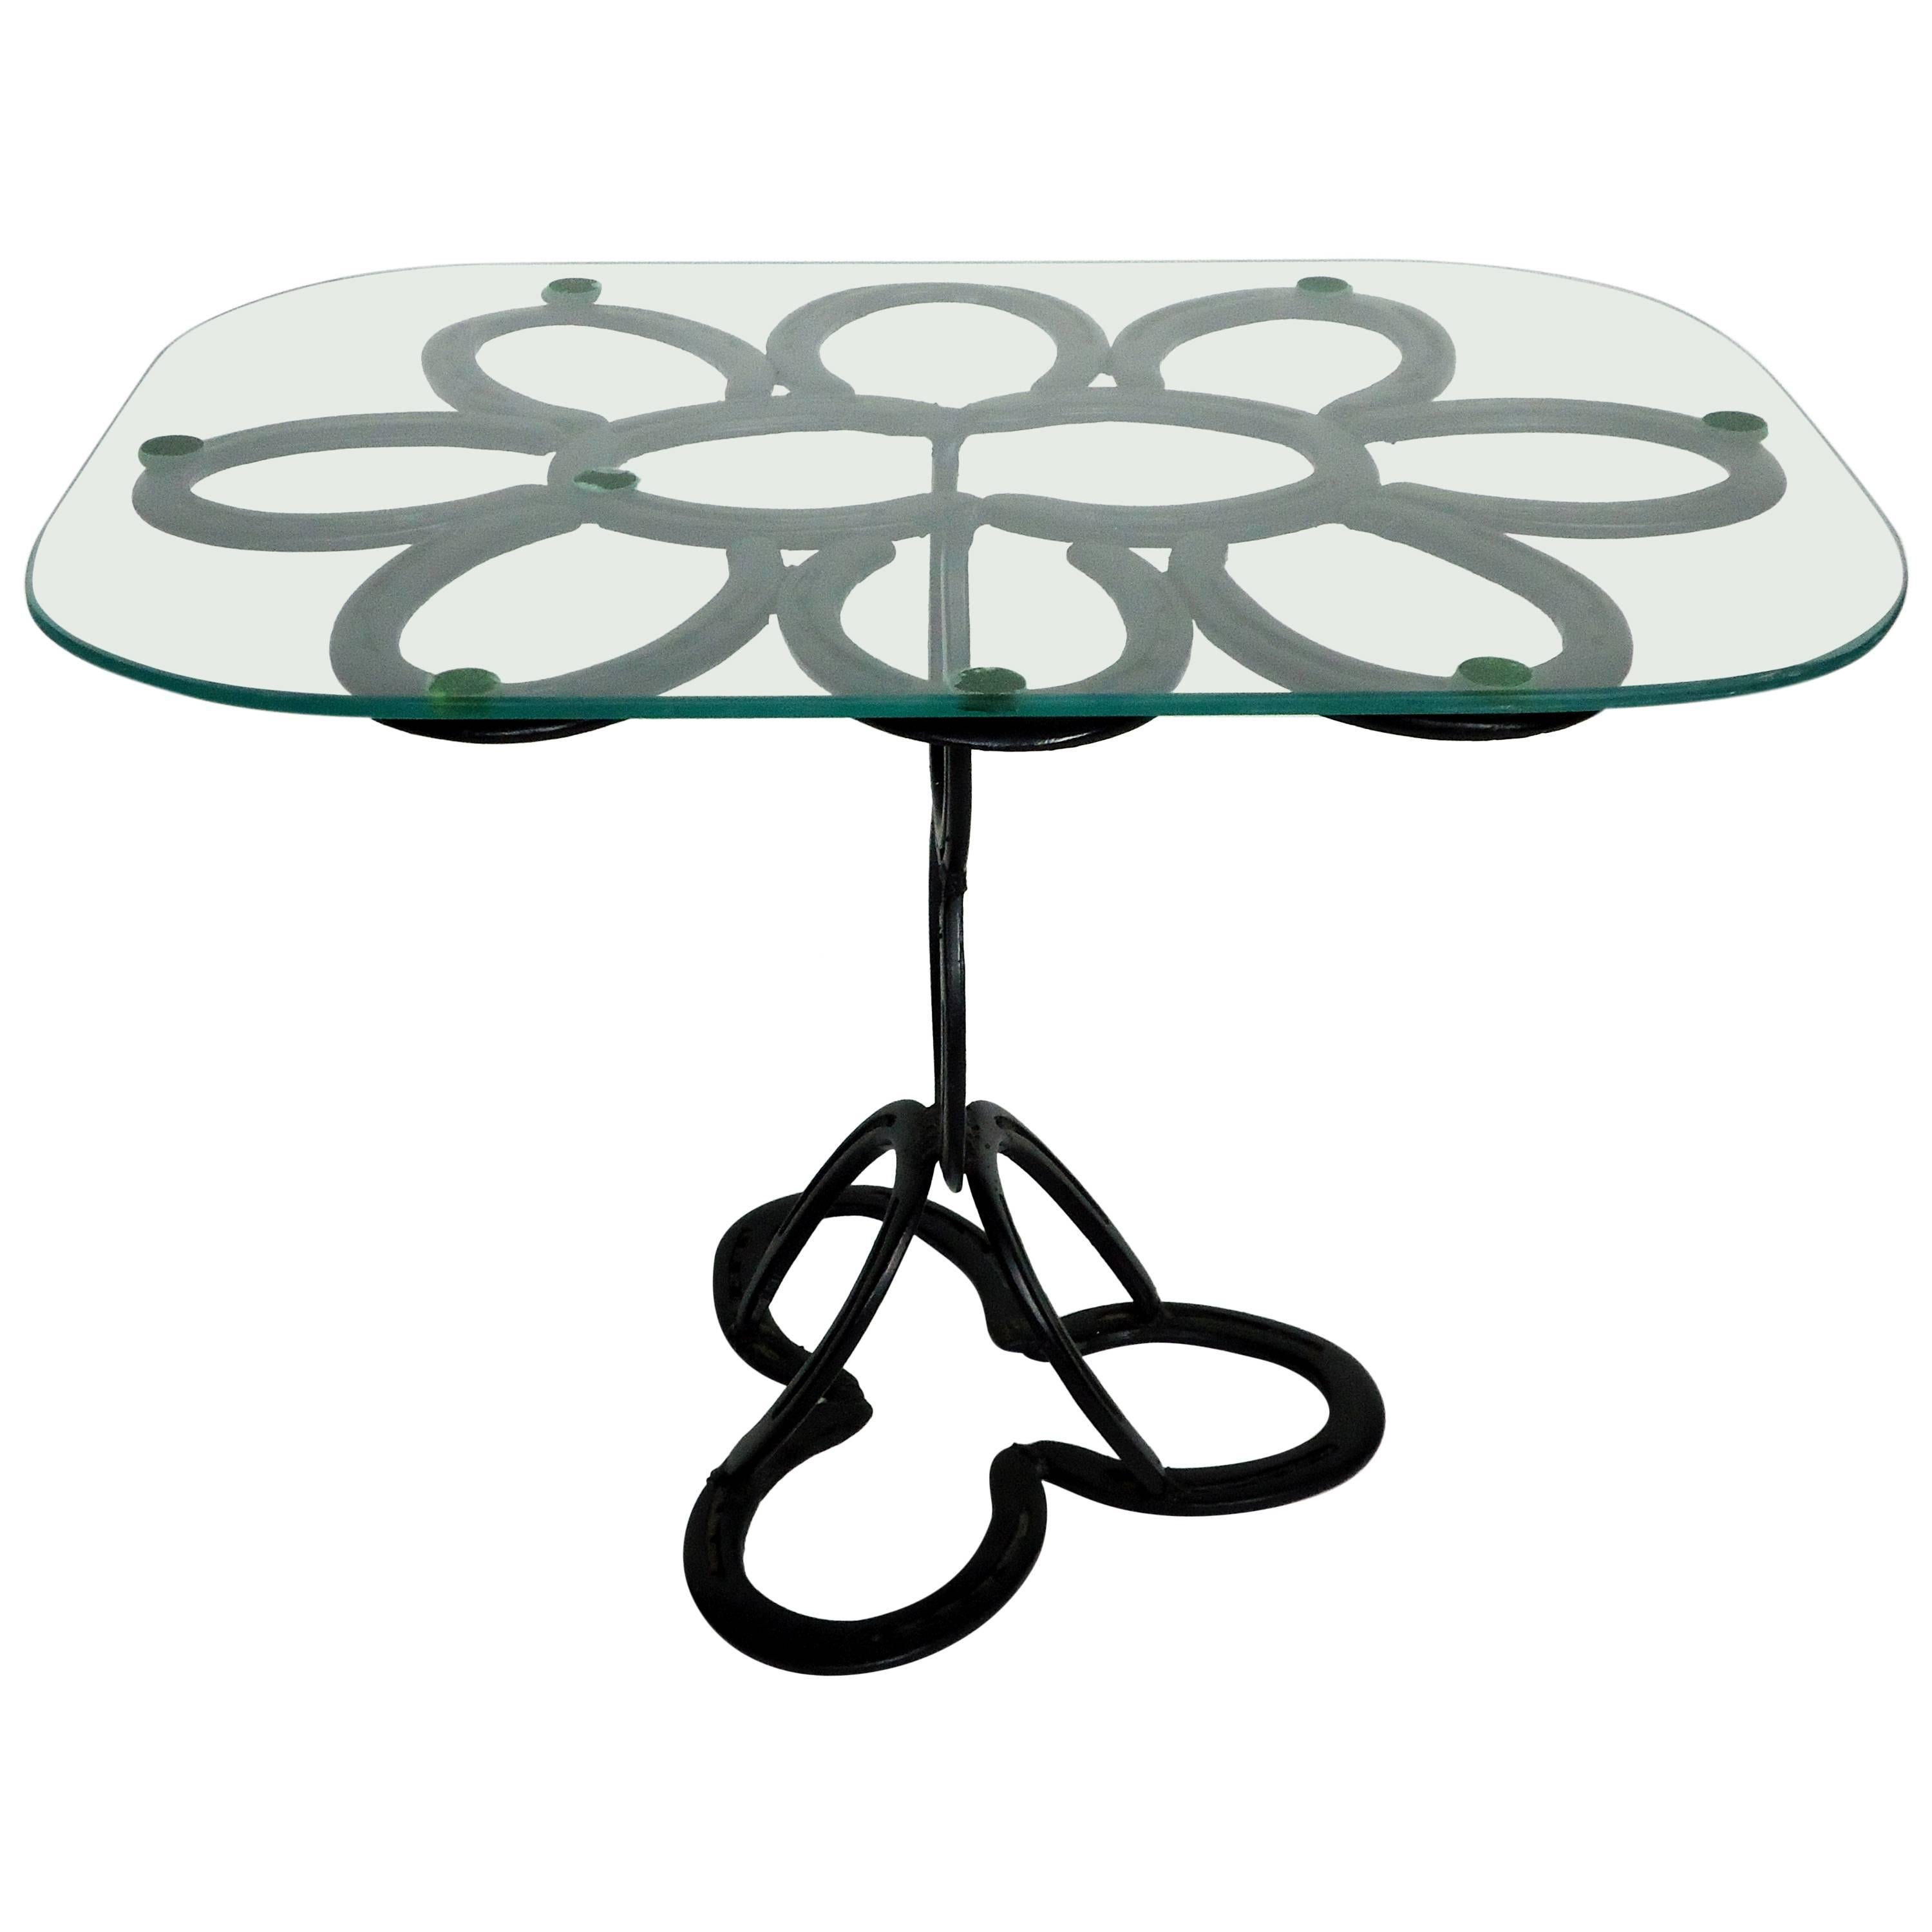 Beautiful end table composed of 17 Shetland Pony scaled iron horseshoes. The horseshoes were cast at the Saint Croix Forge in Minnesota.
The base and glass top are in excellent condition.